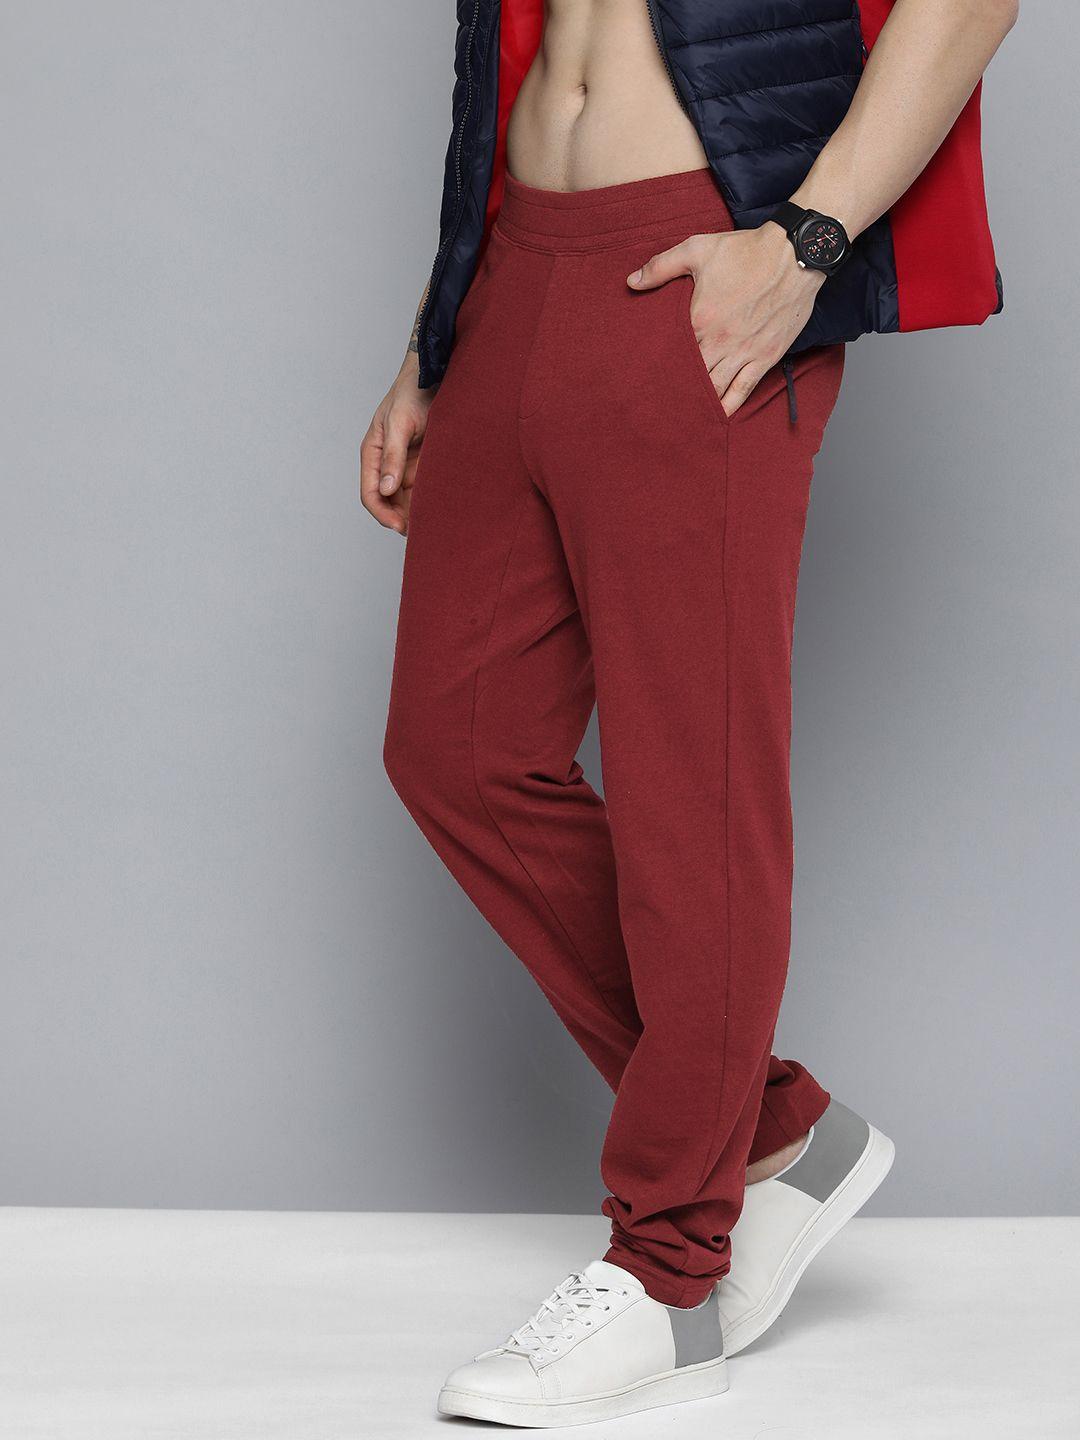 here&now men rust red solid knitted track pants